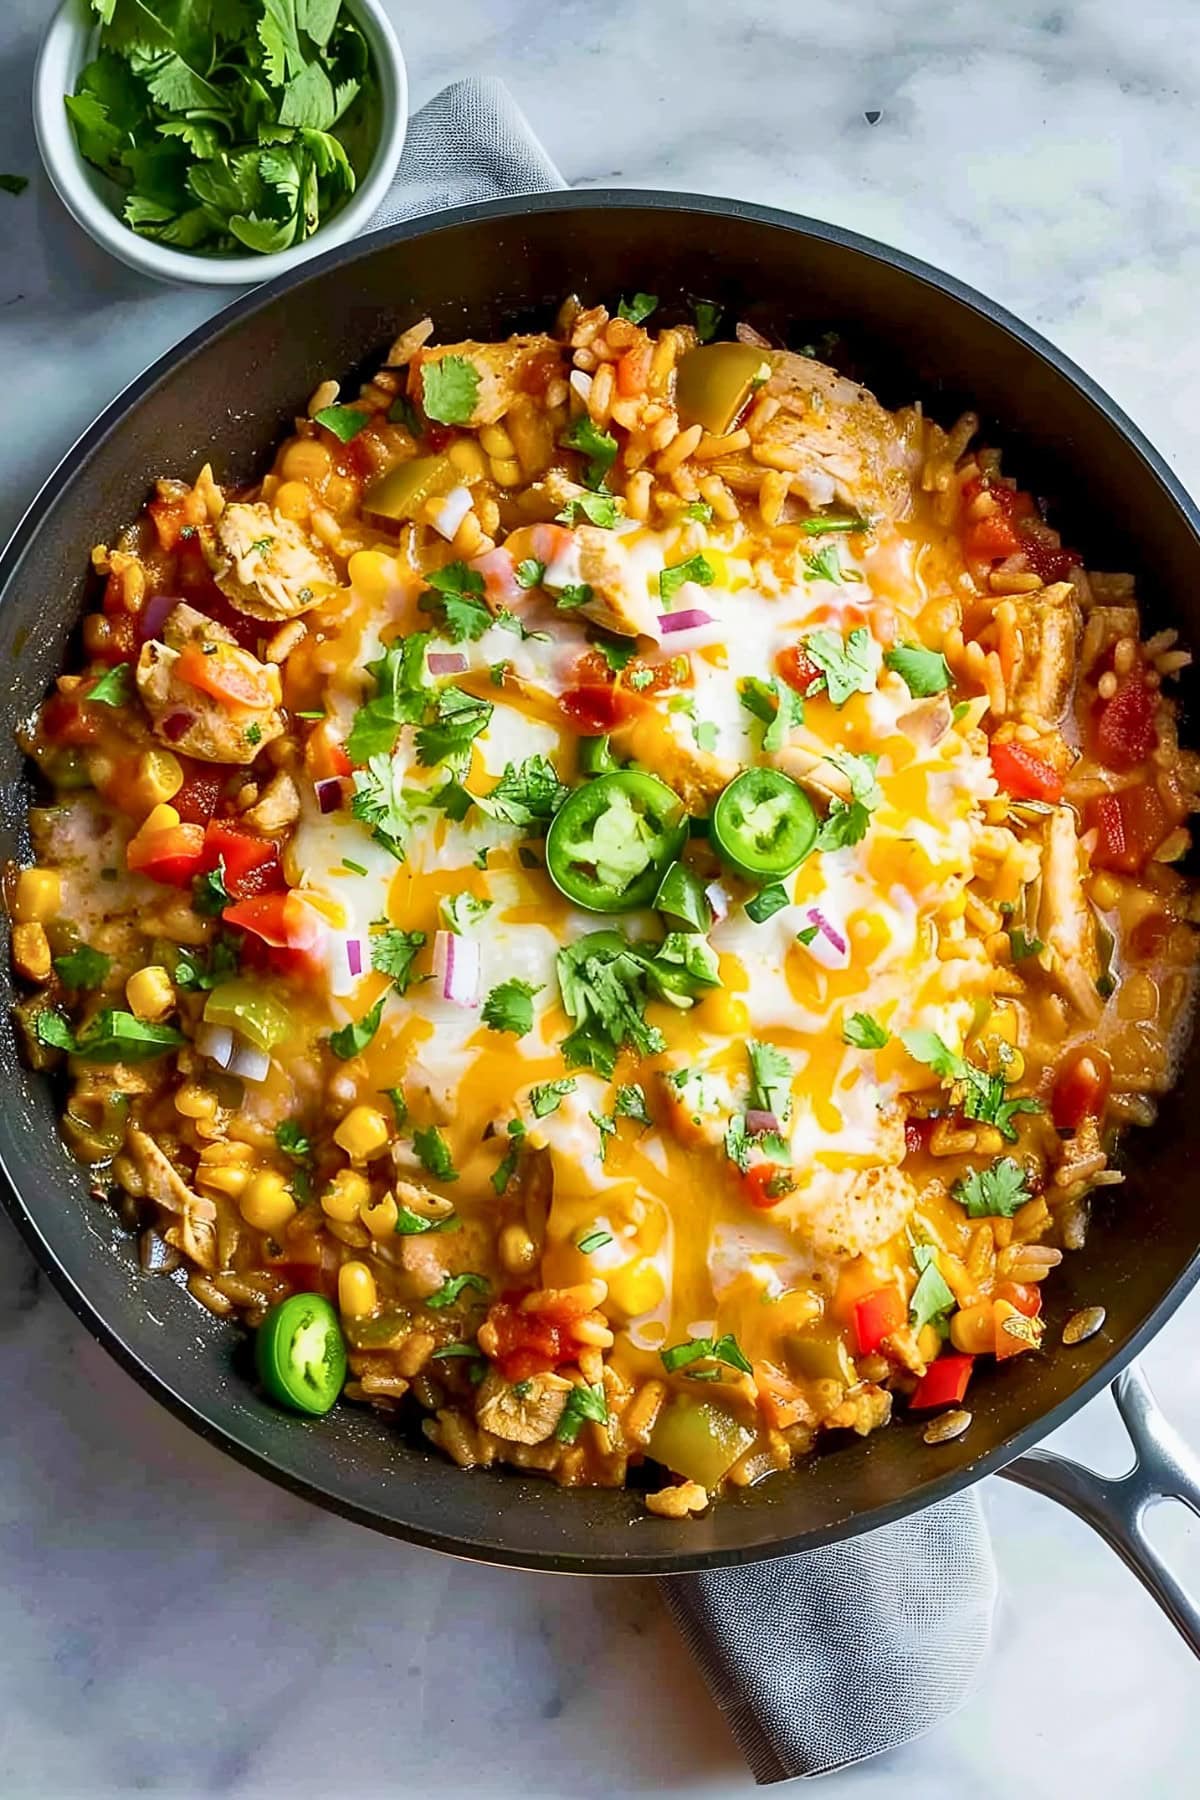 Top View of Mexican Chicken and Rice- Rice, Chicken Tomatoes, Corn, Peppers, and Cheese- In a Skillet, Topped with Fresh Jalapenos and Cilantro